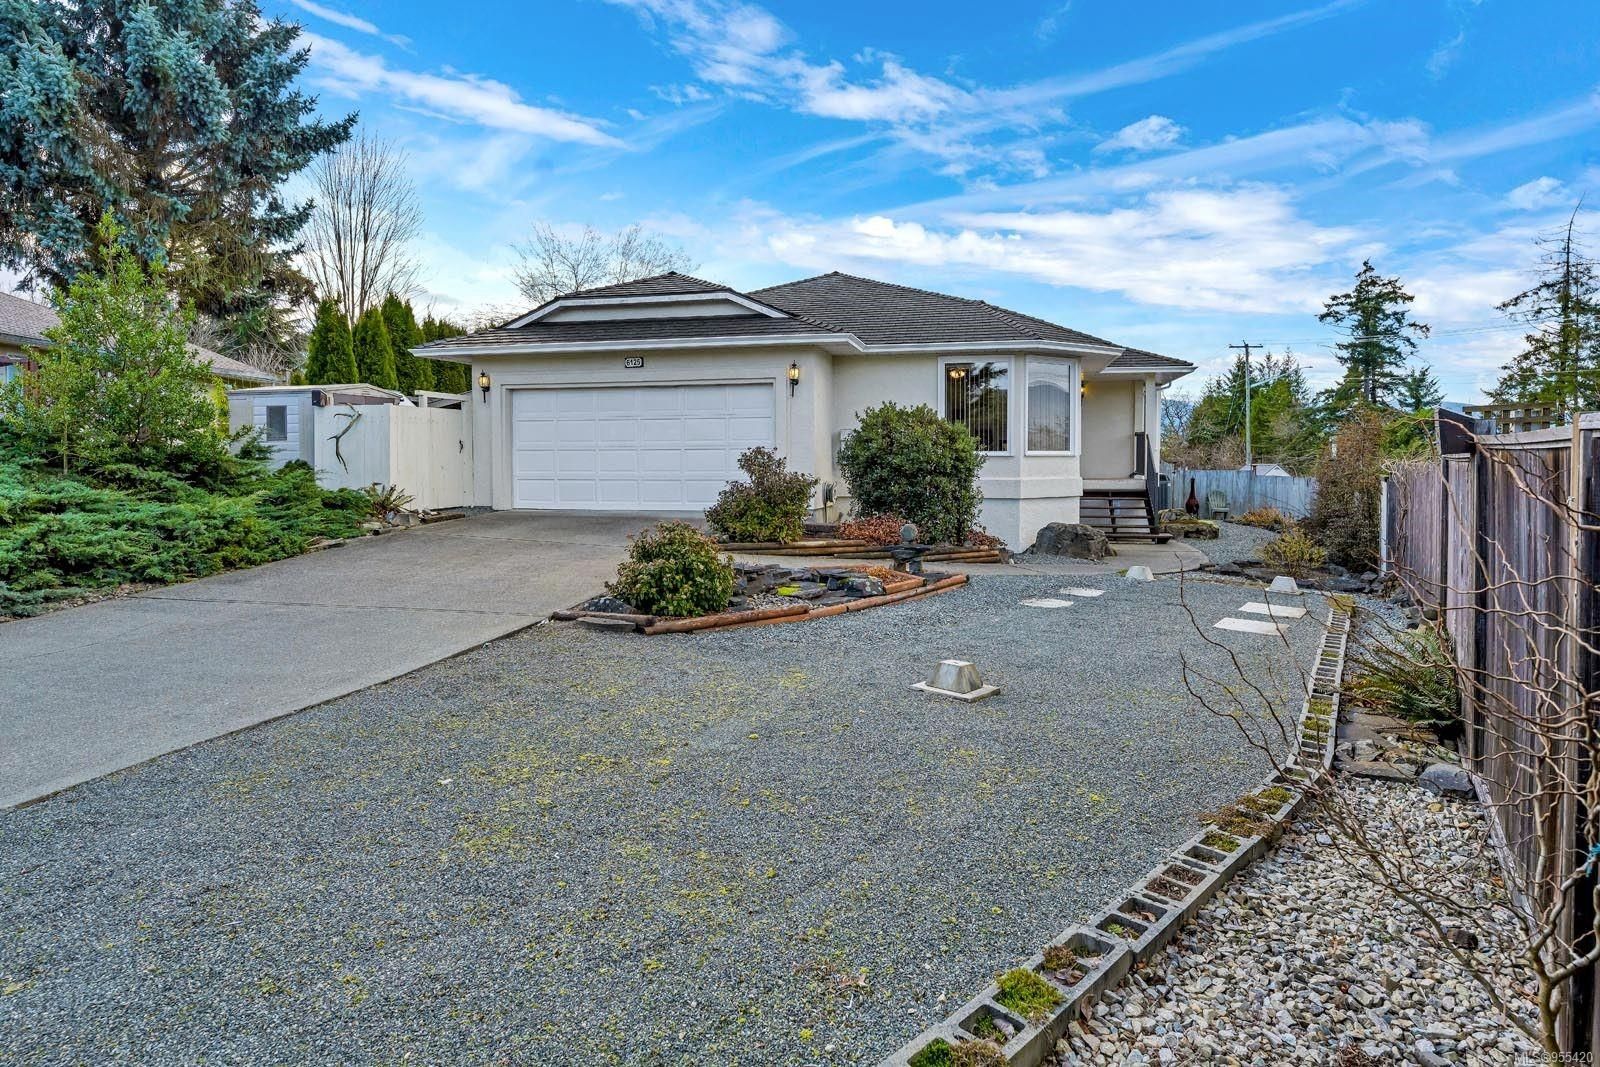 Welcome to 6125 Denali Drive in the beautiful Cowichan Valley!